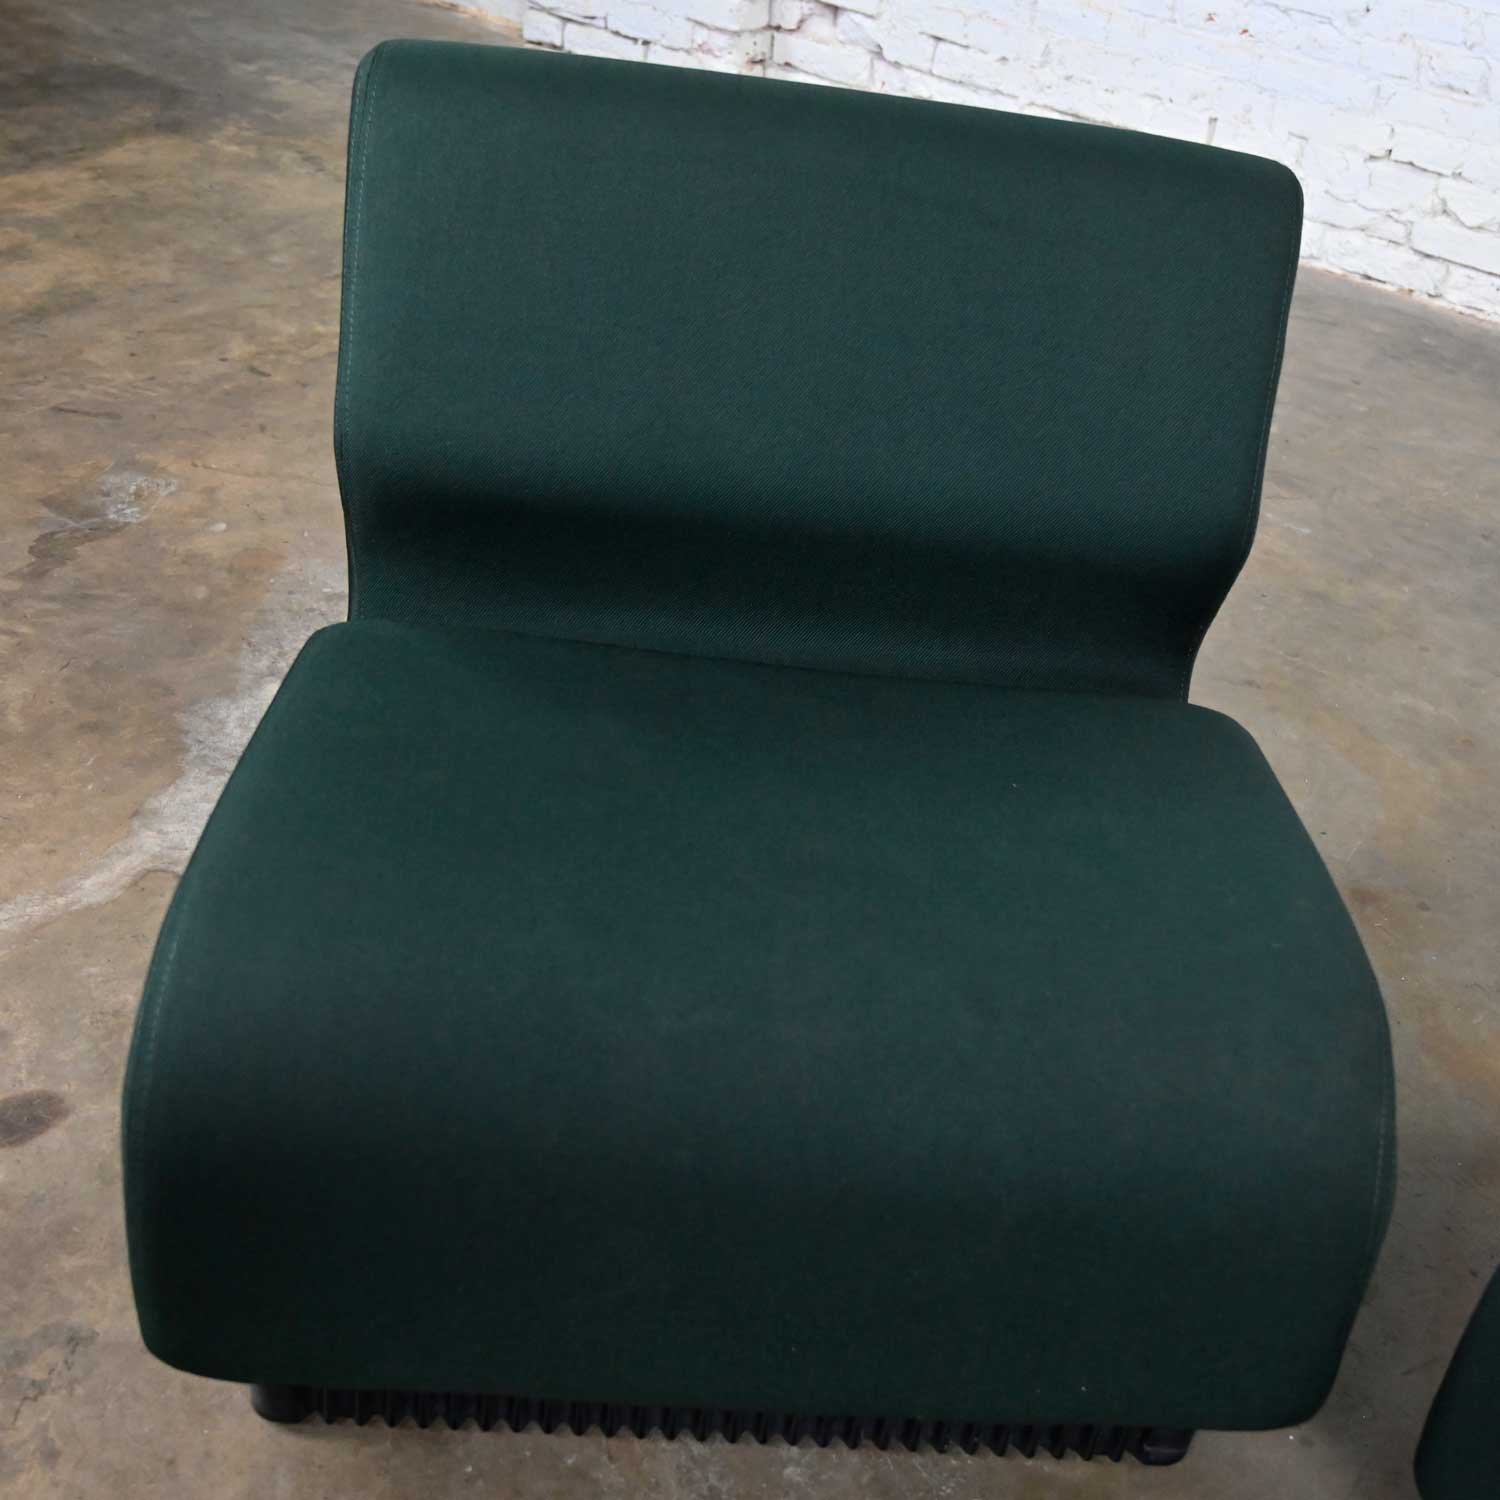 Modern Herman Miller Don Chadwick Modular Seating Forest Green Pair of Chairs